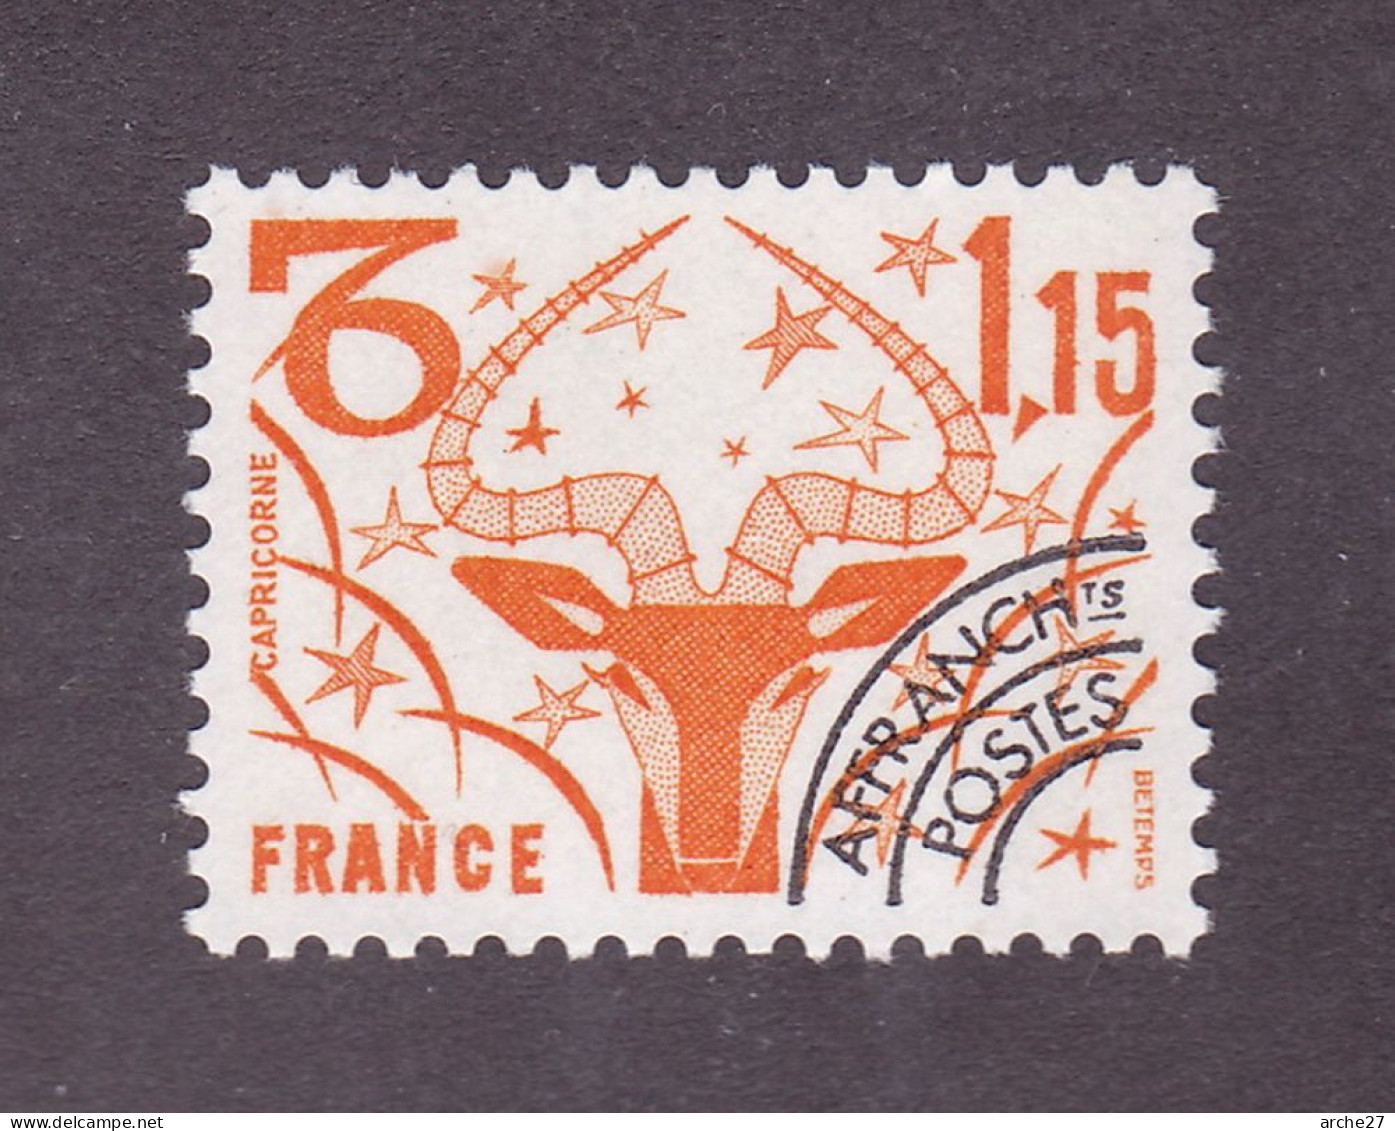 TIMBRE FRANCE PREOBLITERE N° 152 NEUF ** - 1964-1988